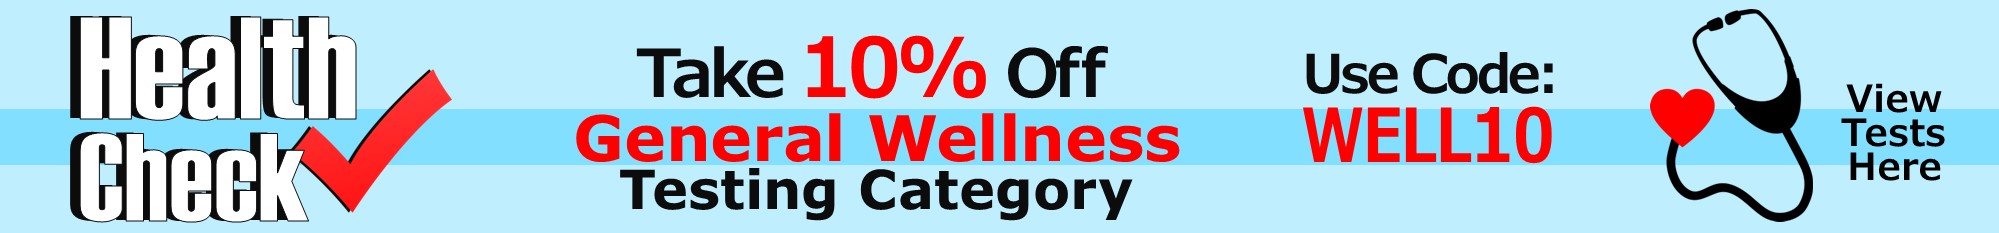 General Wellness Category 10% Off